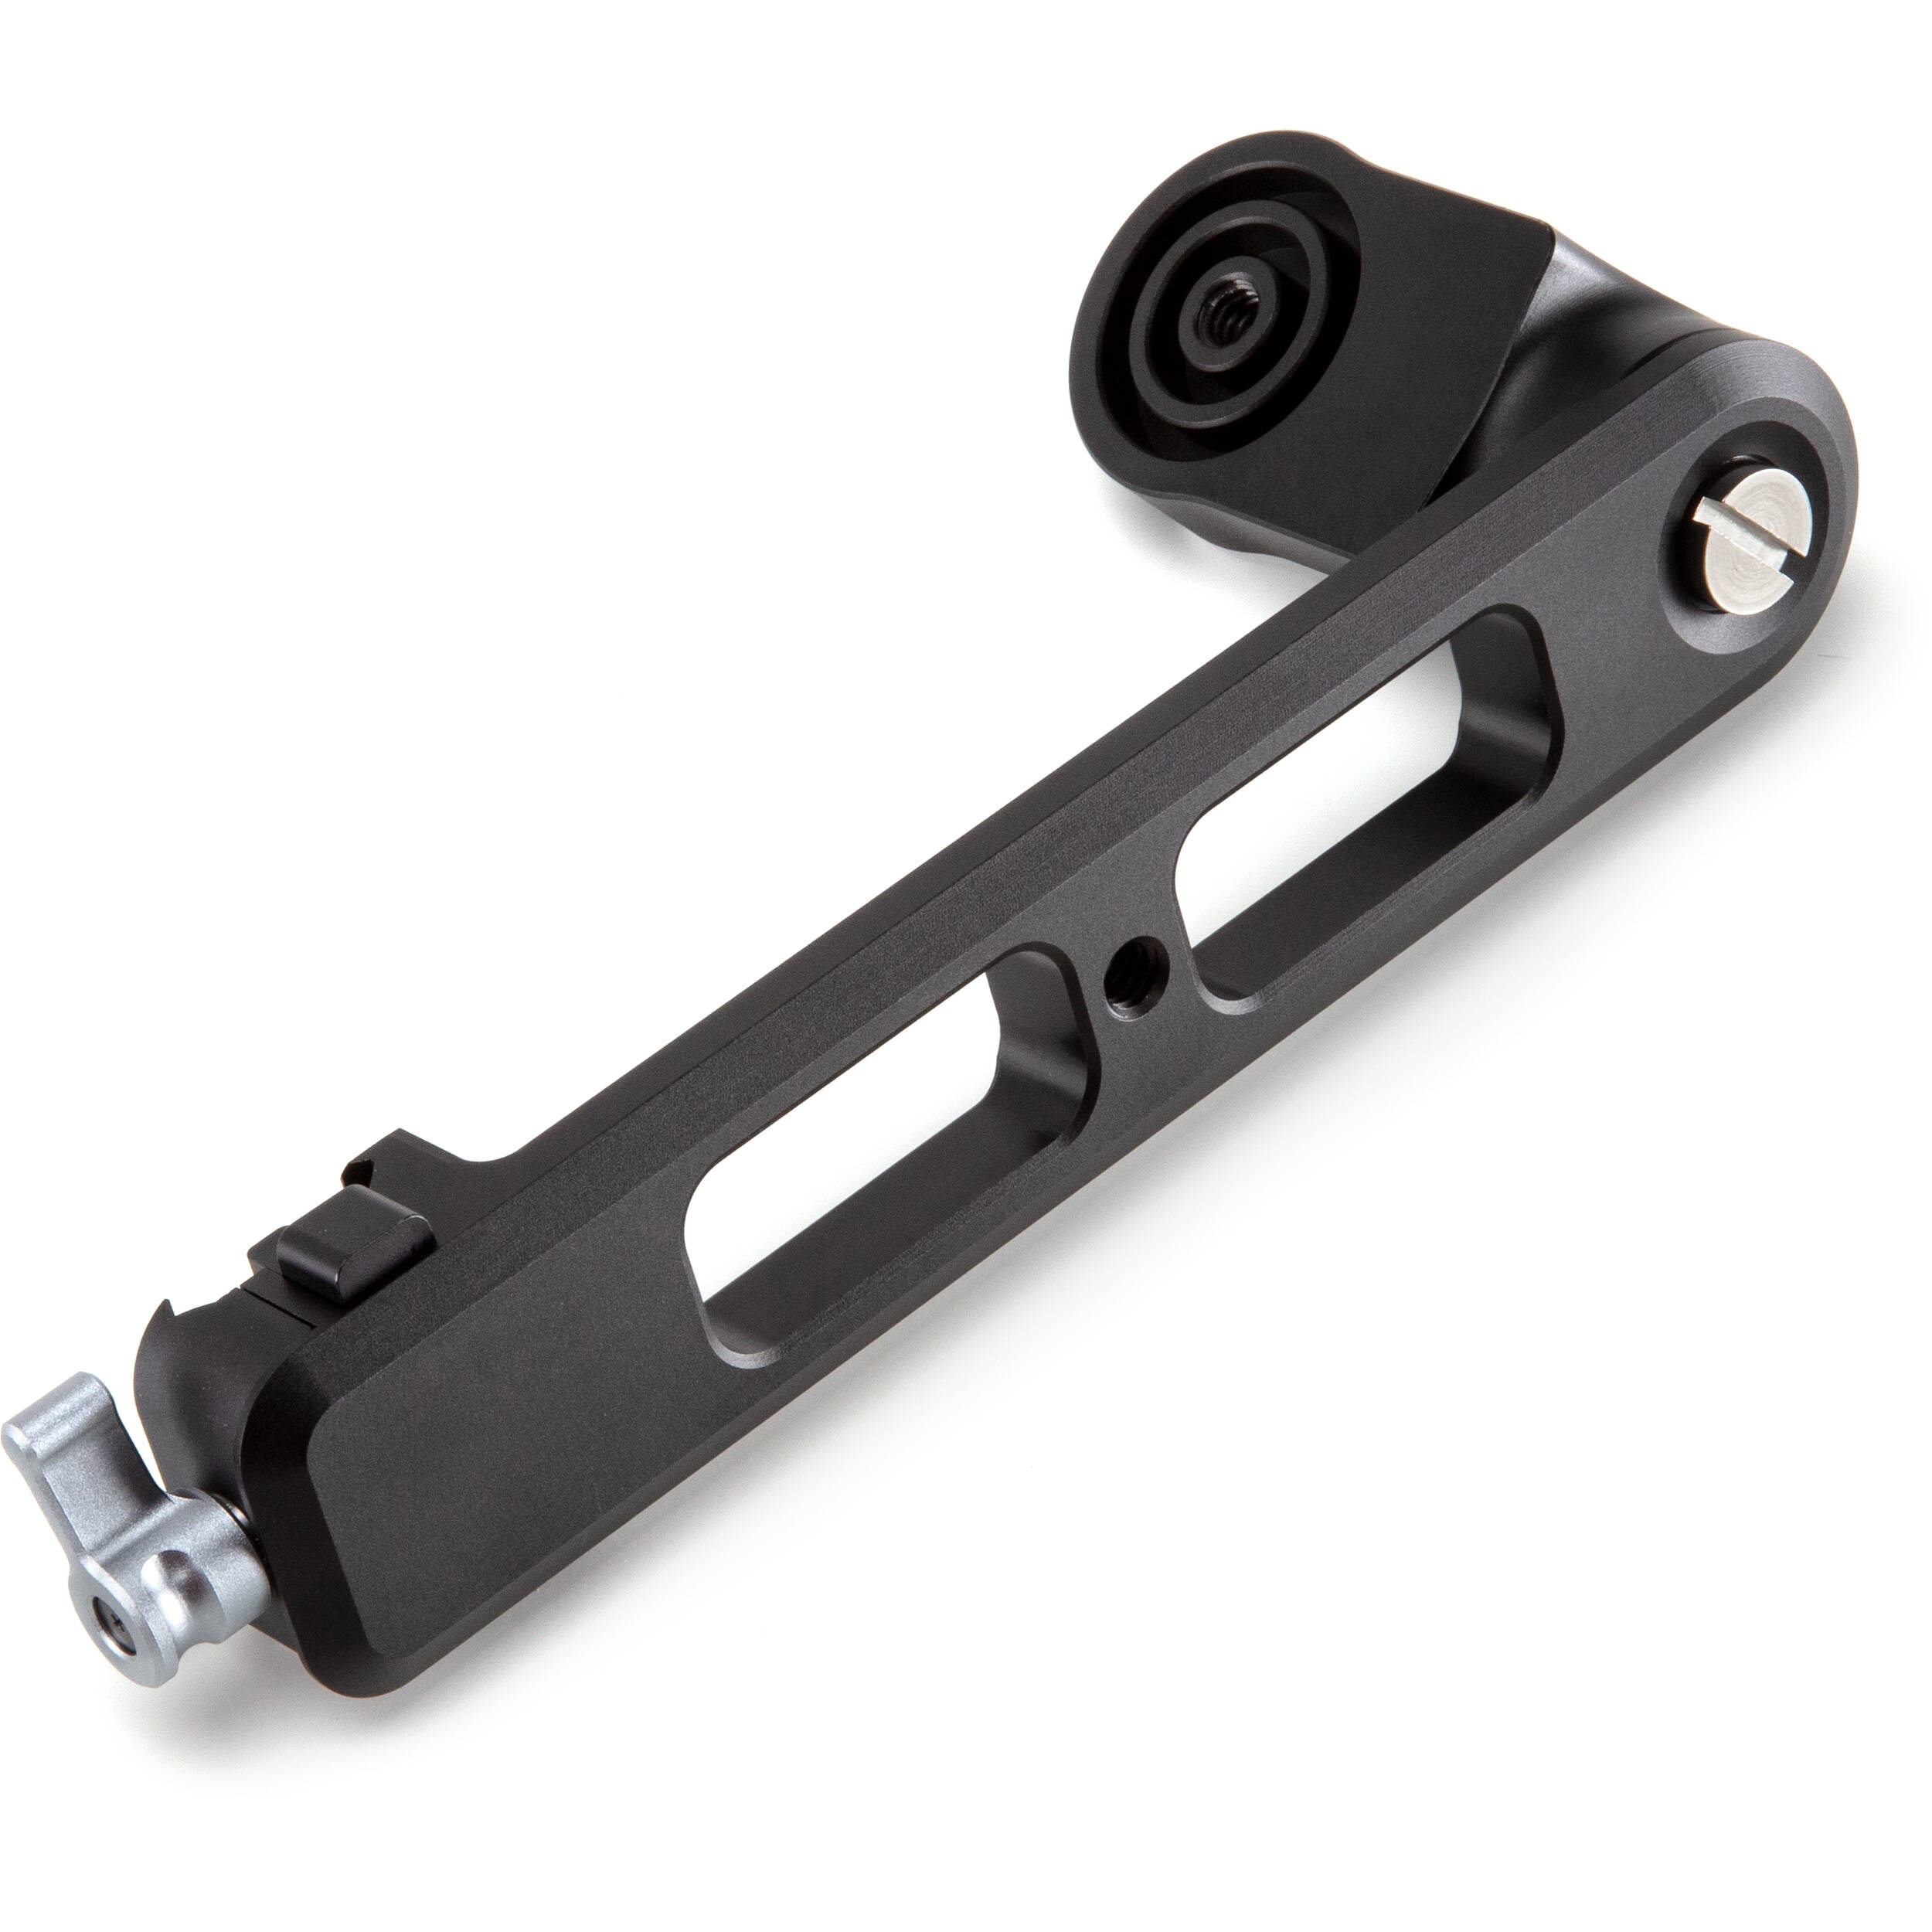 DJI R Briefcase Handle for RS 2 and RSC 2 Gimbals